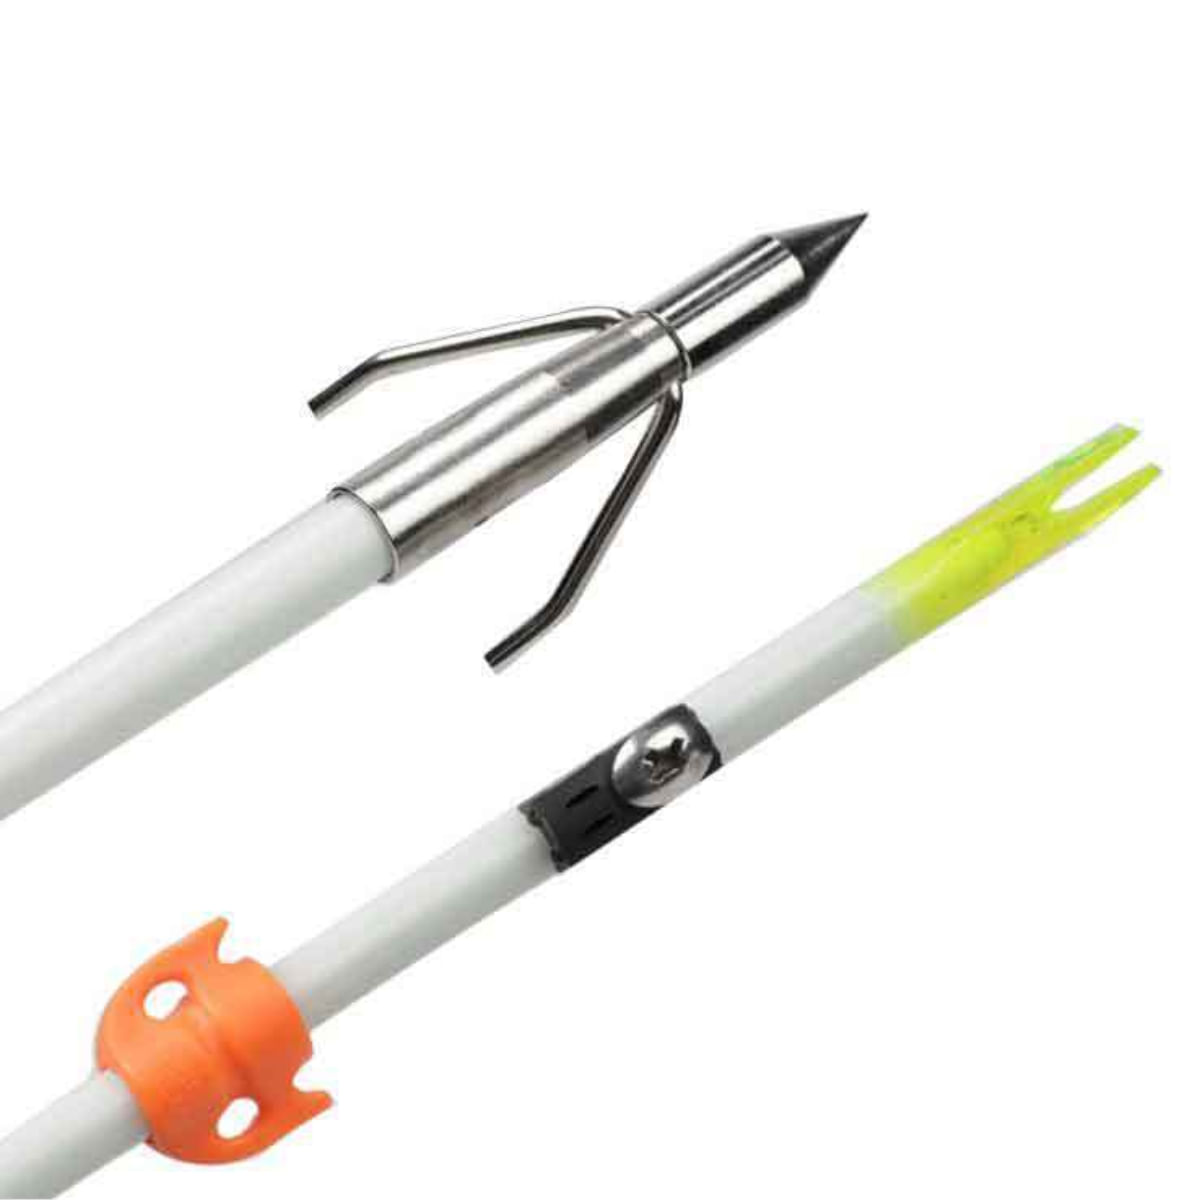 RPM Bowfishing Black Mamba Arrow with NOS Point 